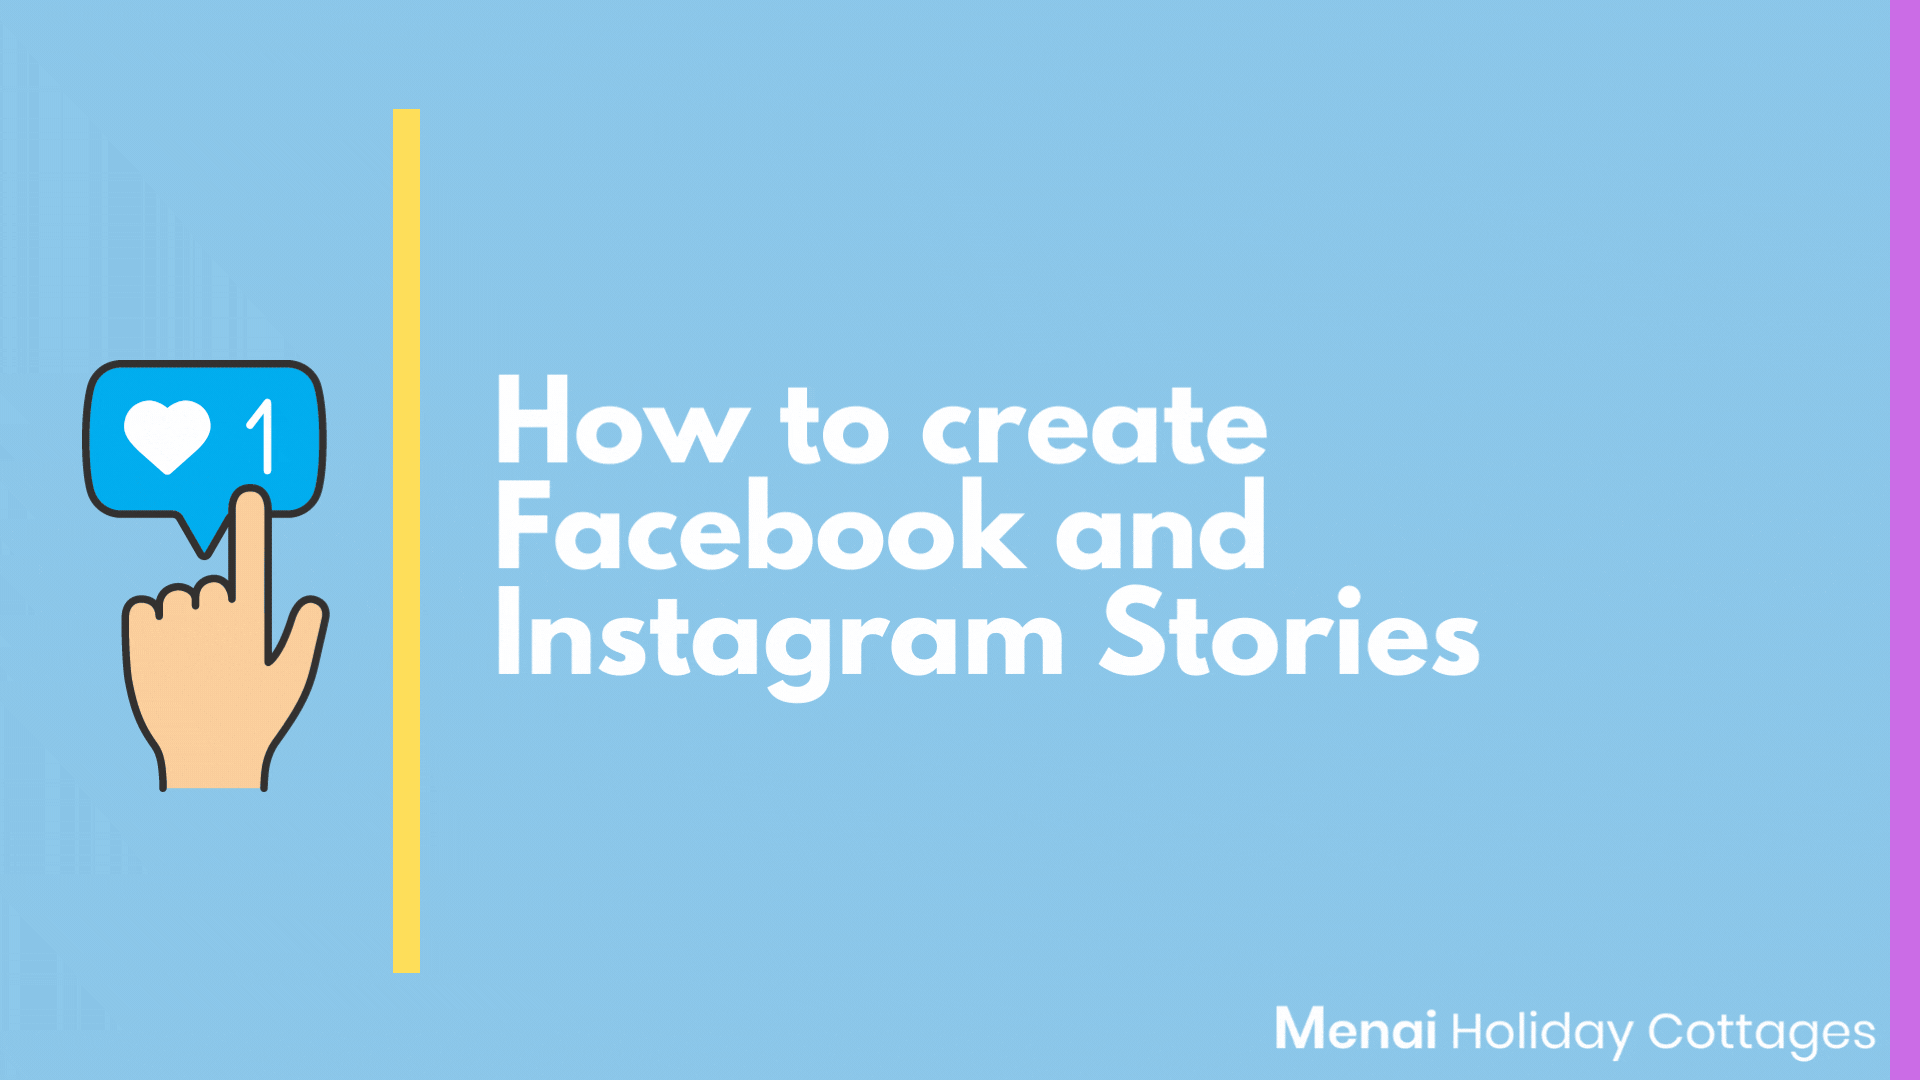 How to create Facebook and Instagram stories